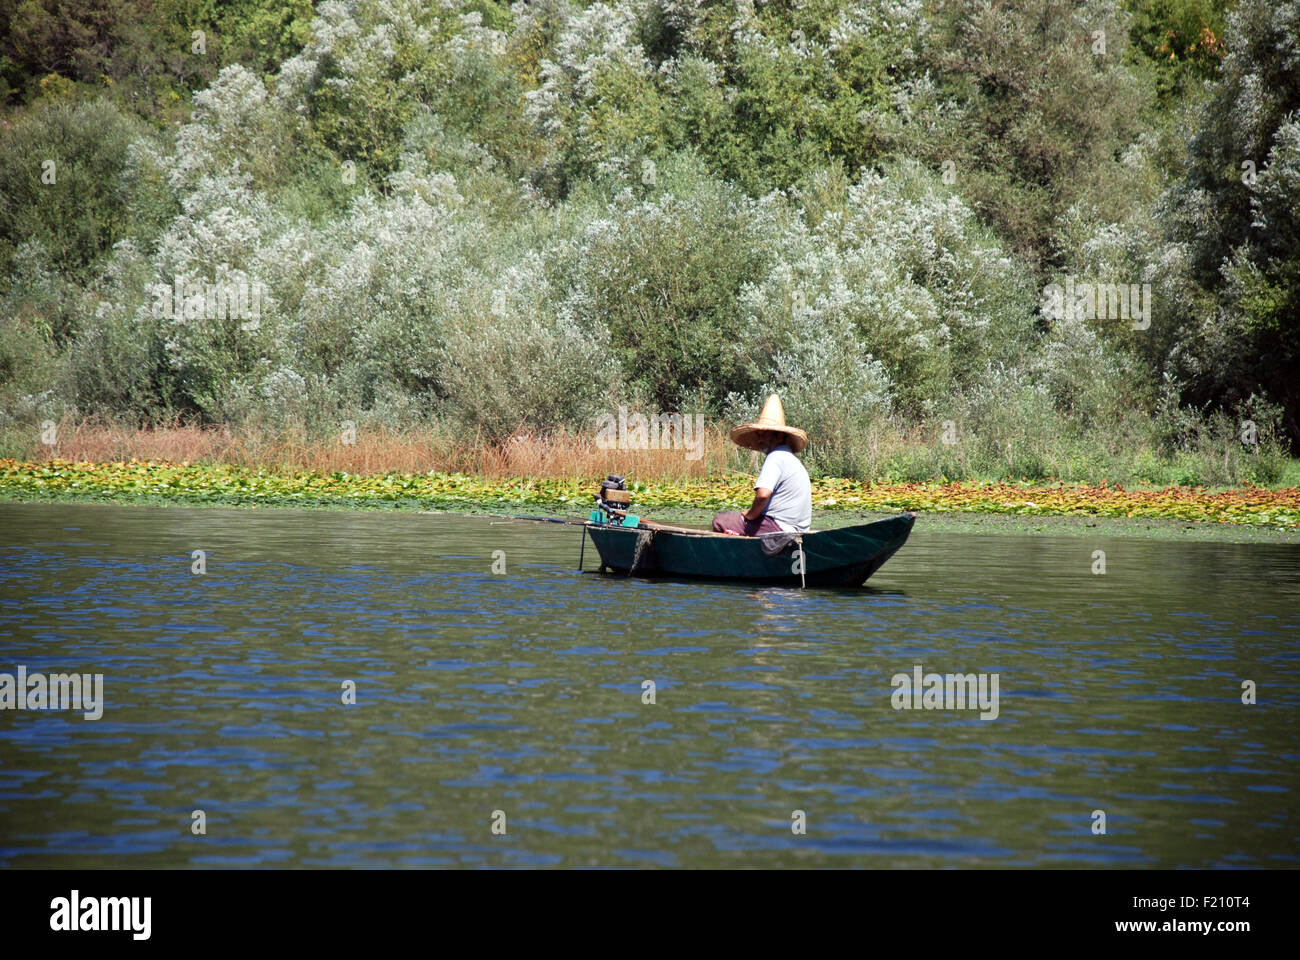 A man in a small boat fishing on Skadar lake in Montenegro Stock Photo